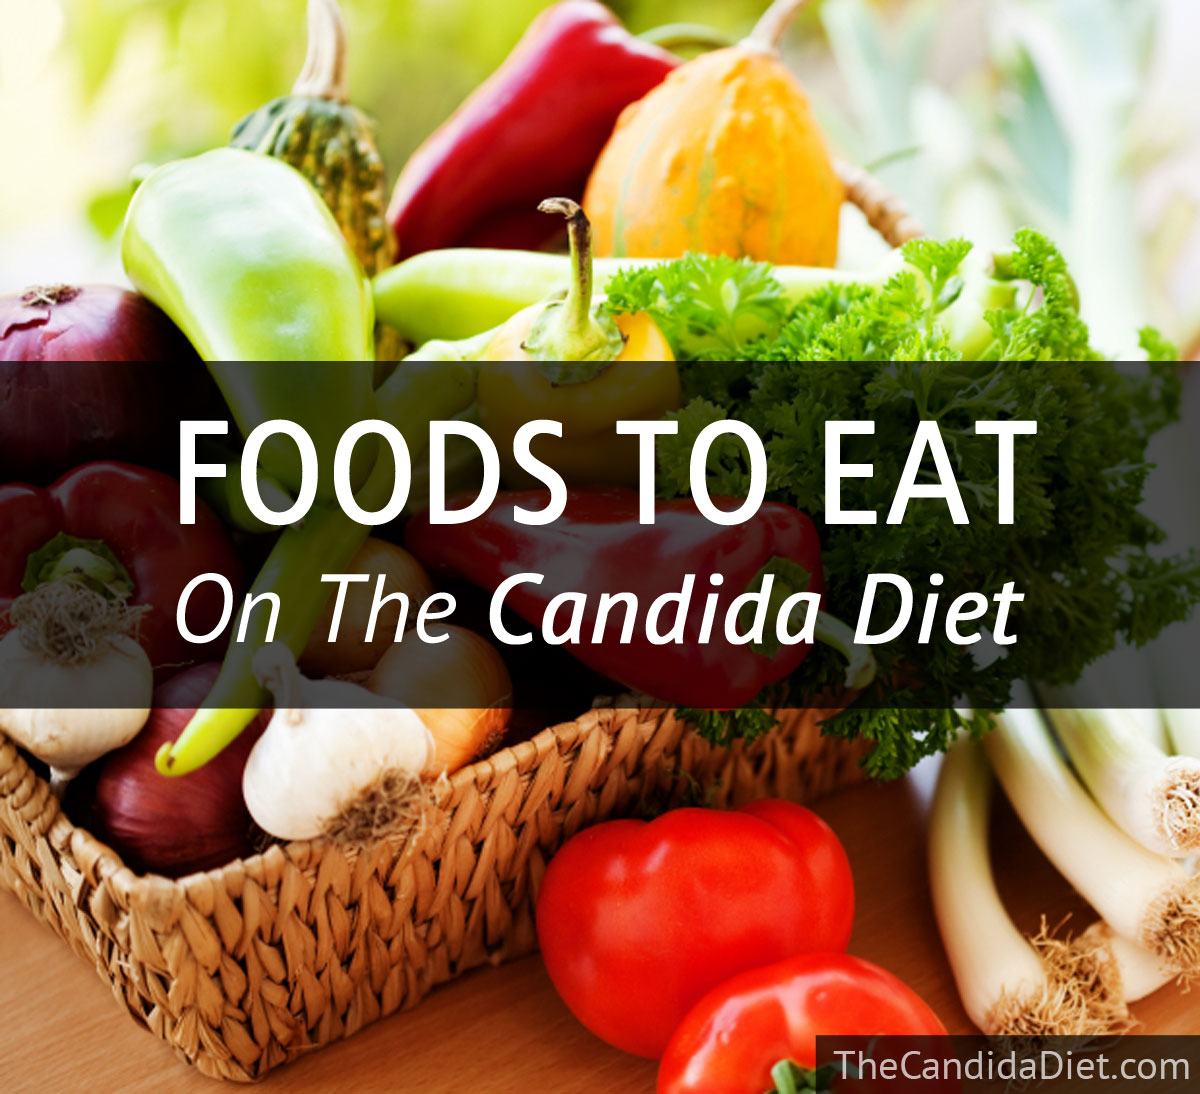 Foods To Eat On The Candida Diet